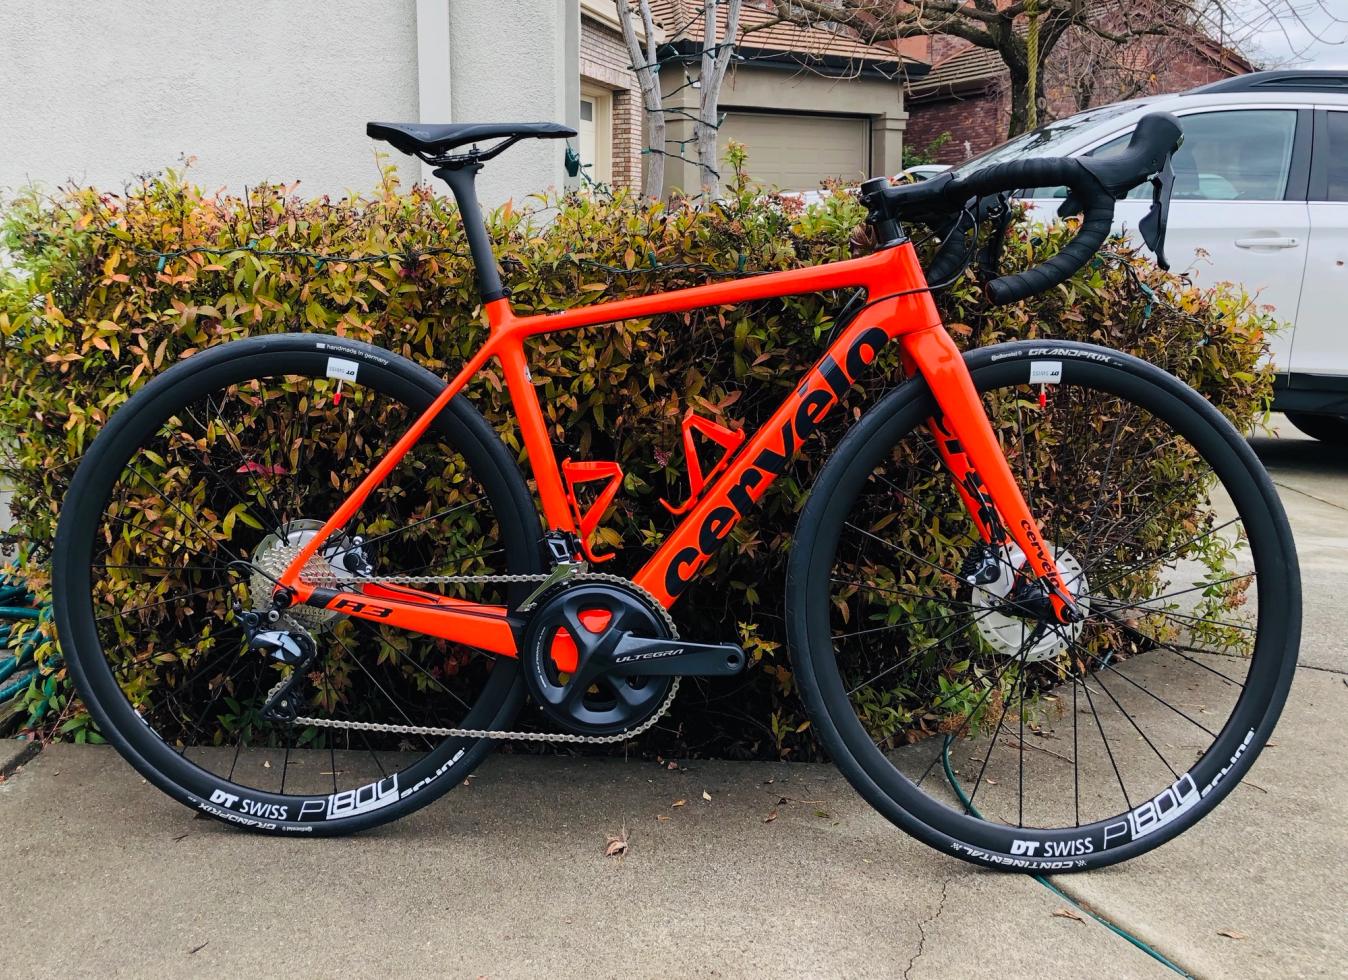 This Cervélo R3, submitted by ronzilla86, was fresh out of the box